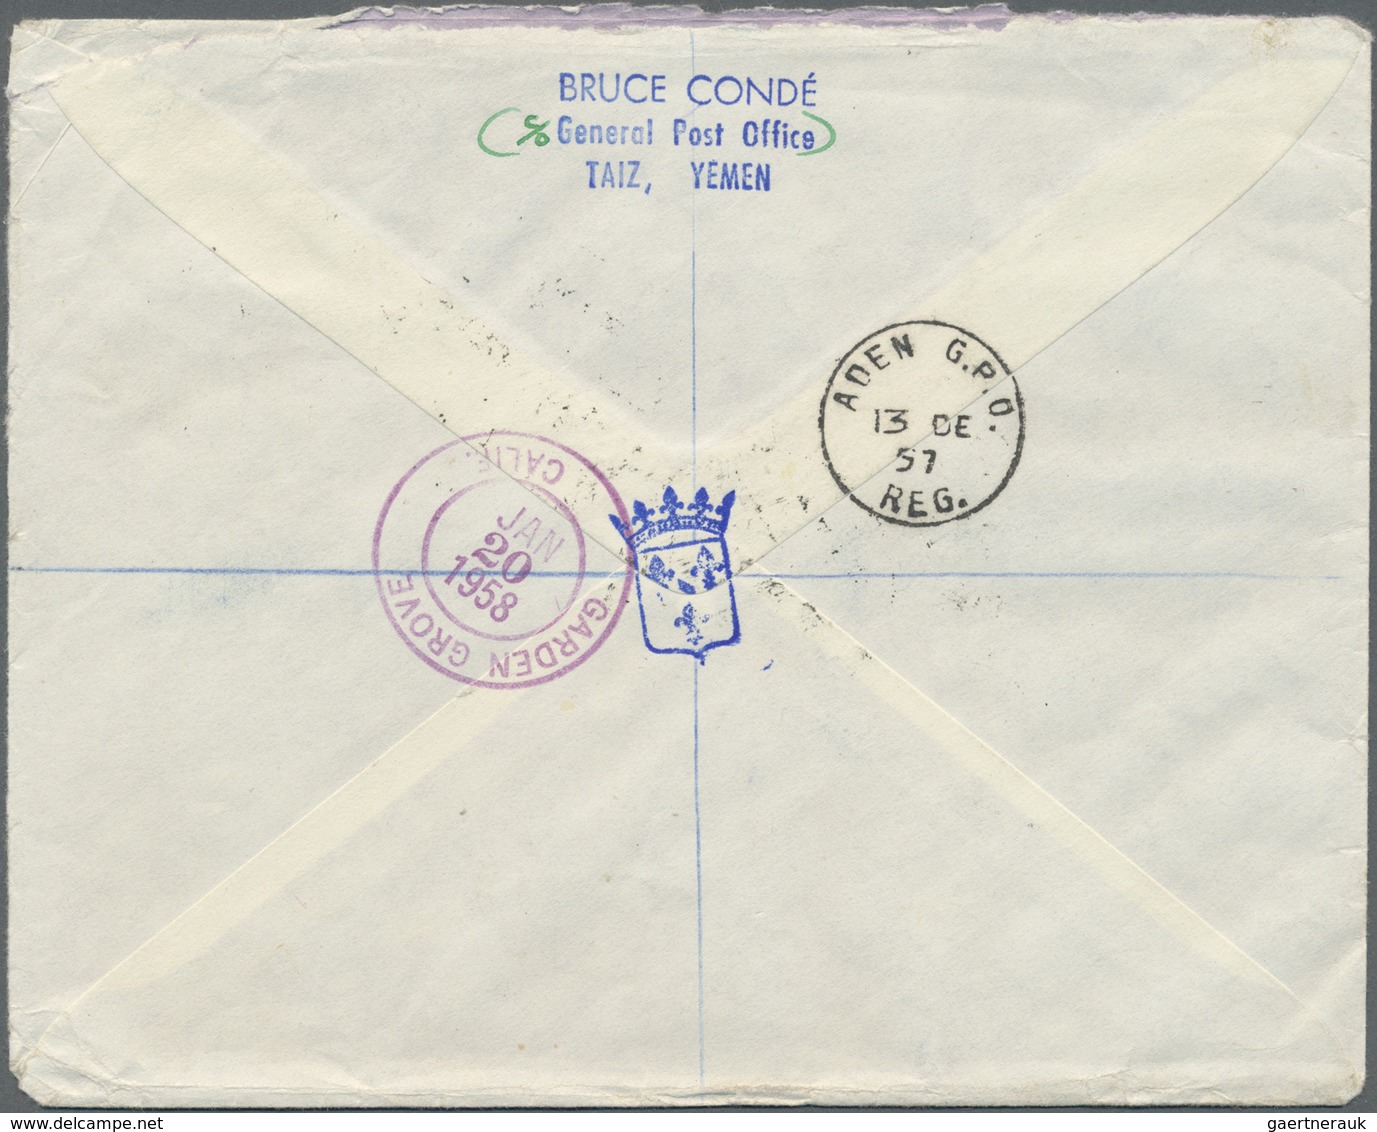 Br Jemen: 1957/1960, lot of four covers to USA resp. Aden, three registered mail, 4b. Arab Postal Union